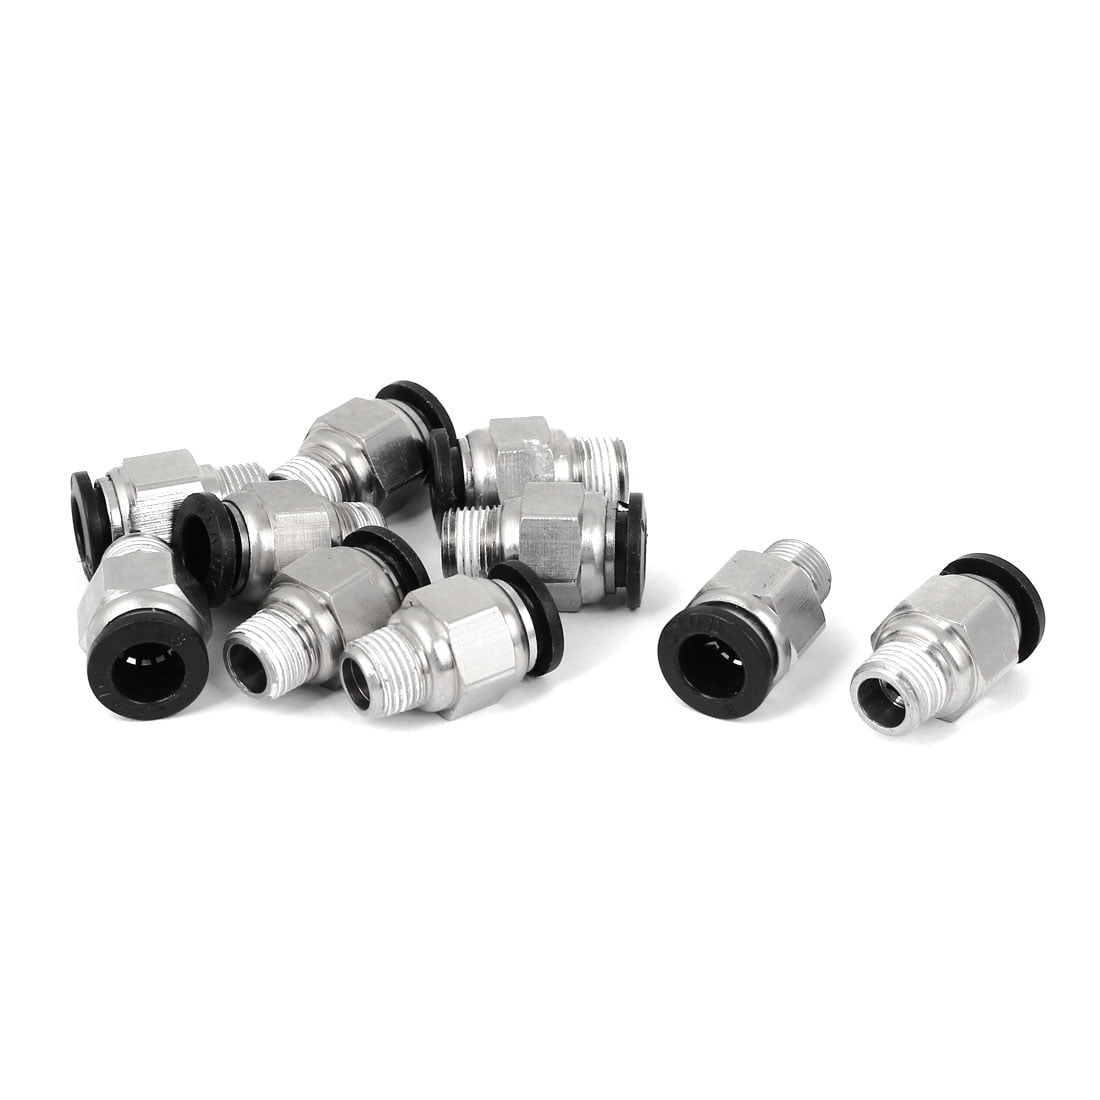 10 PCS 8mm Pneumatic Air Quick Push to Connect Fitting Straight Tube、 HH 